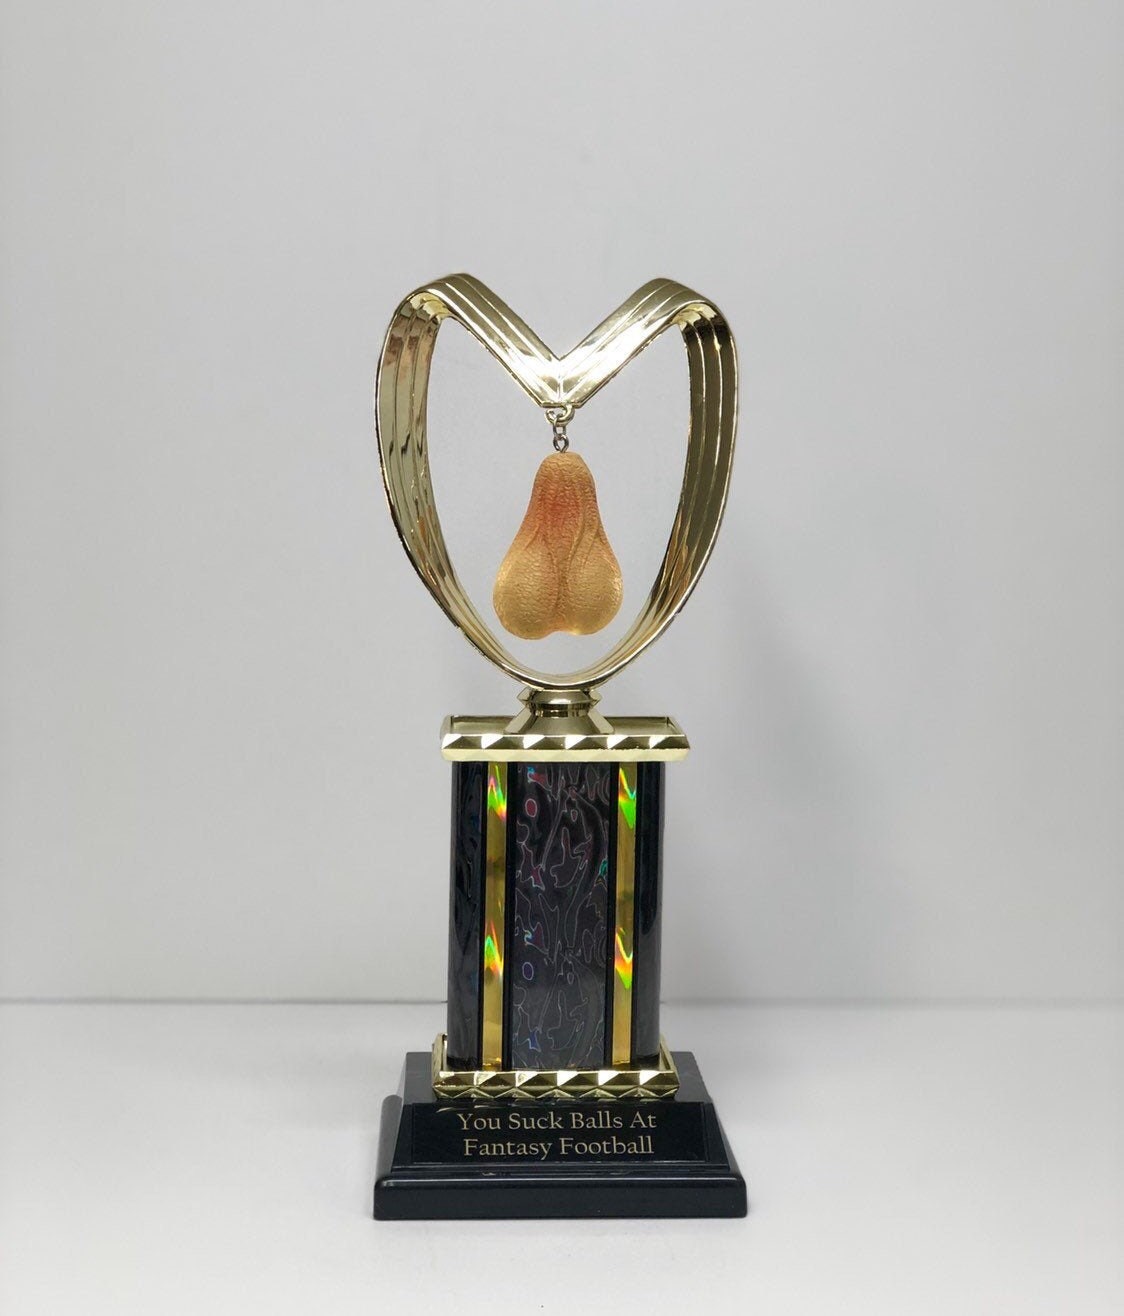 Fantasy Football Sacko You Suck Balls Loser Trophy Last Place FFL Trophy You Suck HAIRY Balls Funny Trophy Adult Humor Gag Gift Testicle